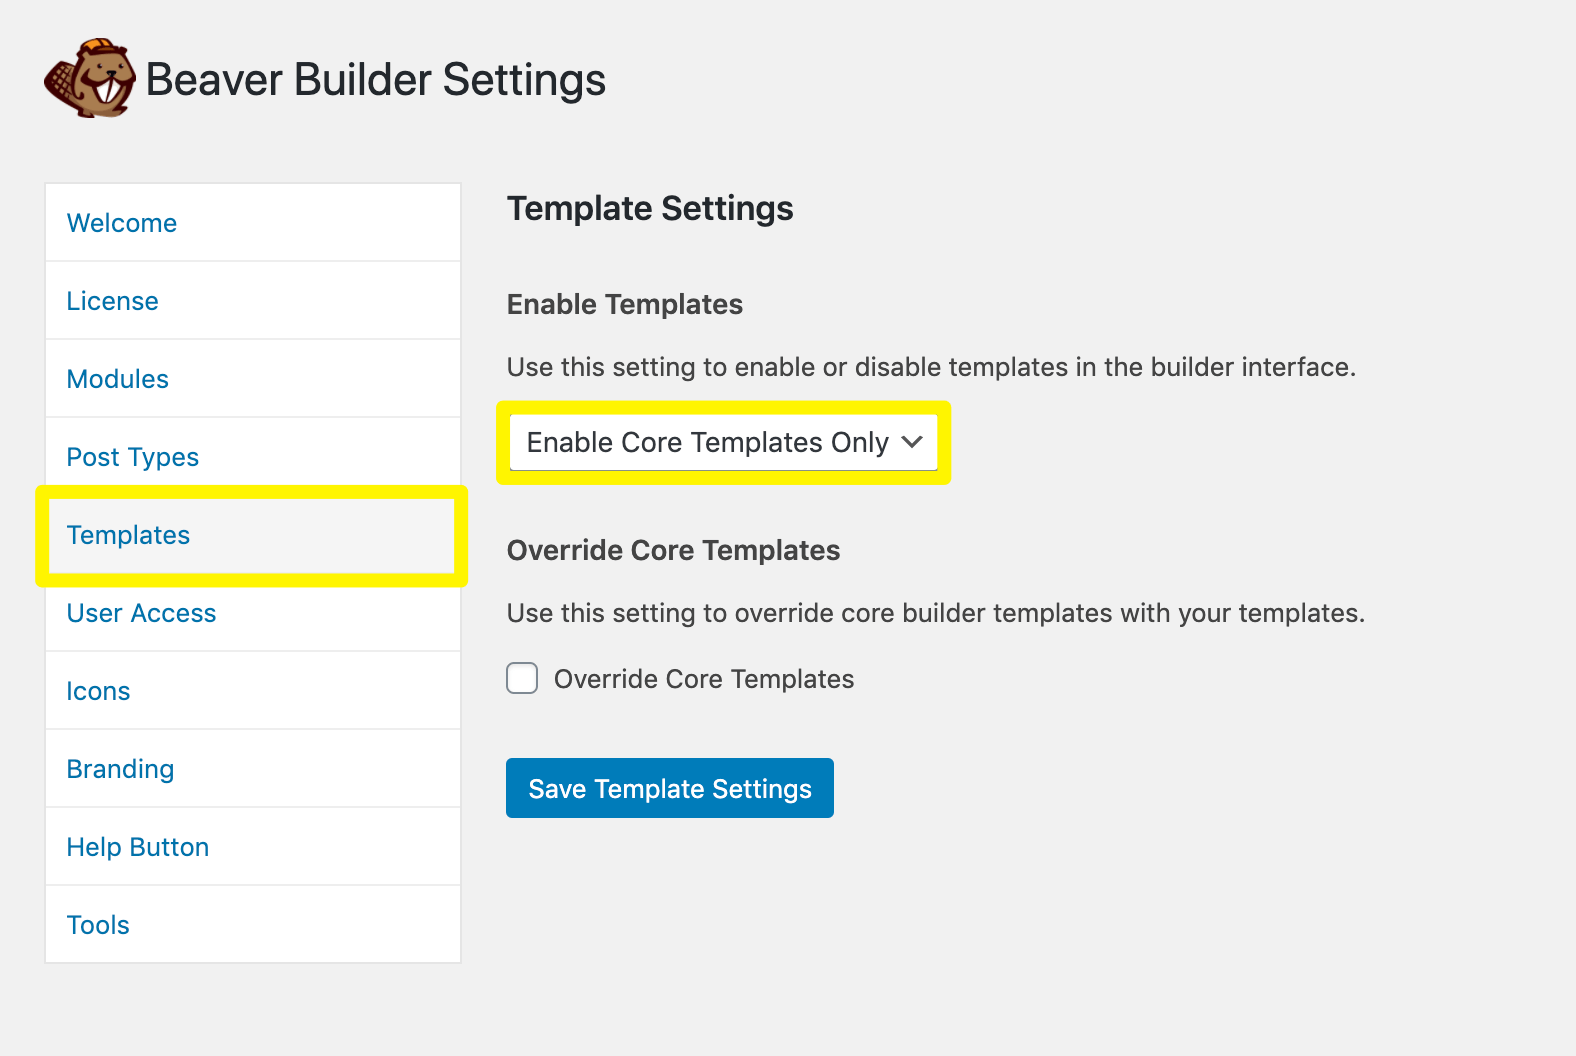 Enabling core templates only in Beaver Builder.